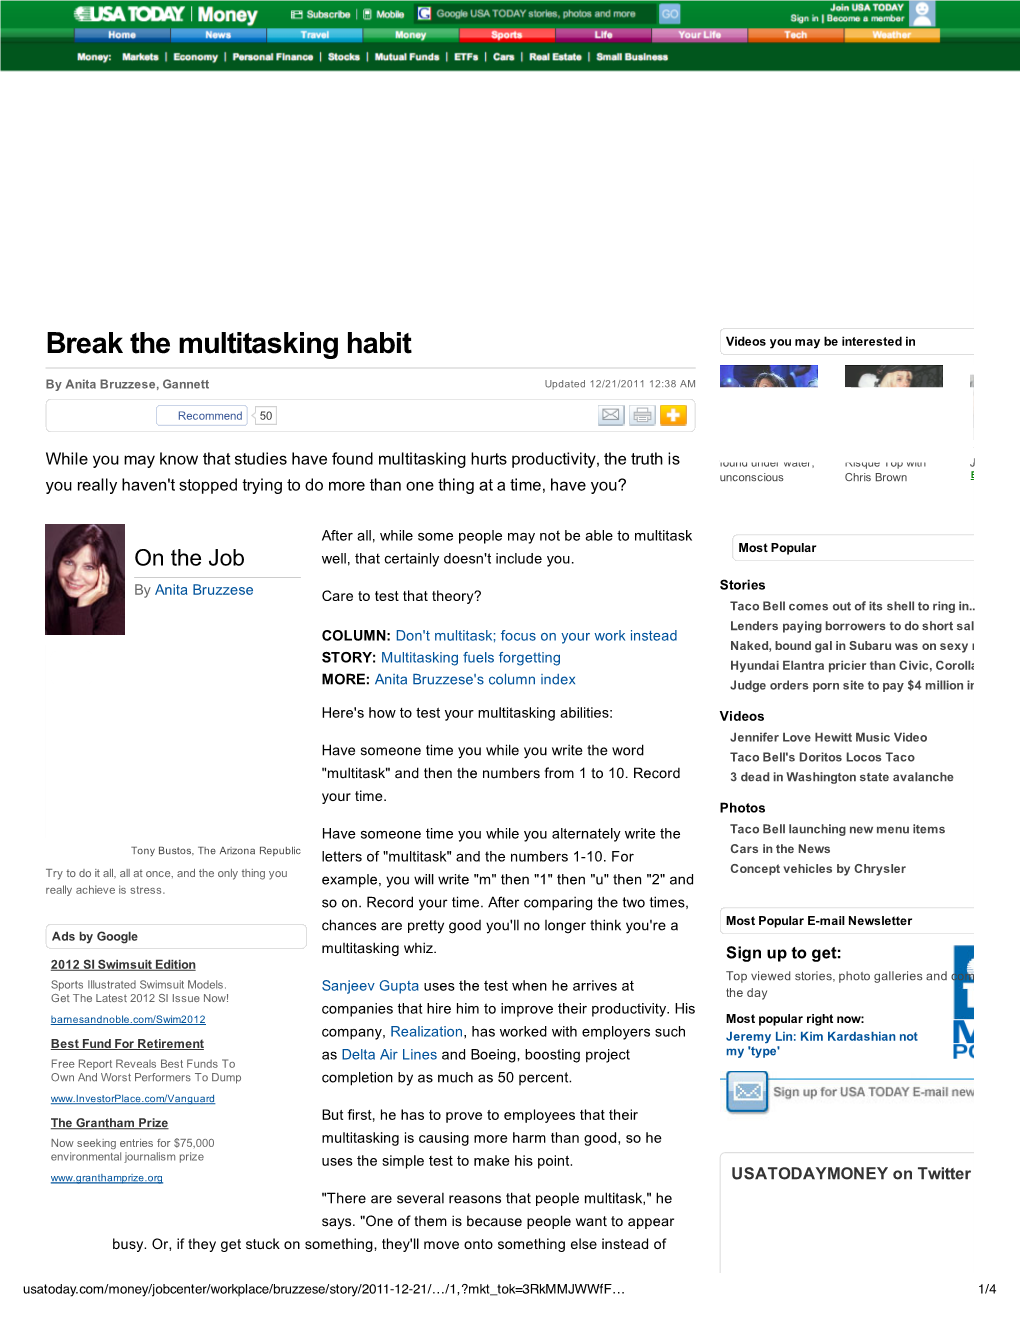 Break the Multitasking Habit Videos You May Be Interested In